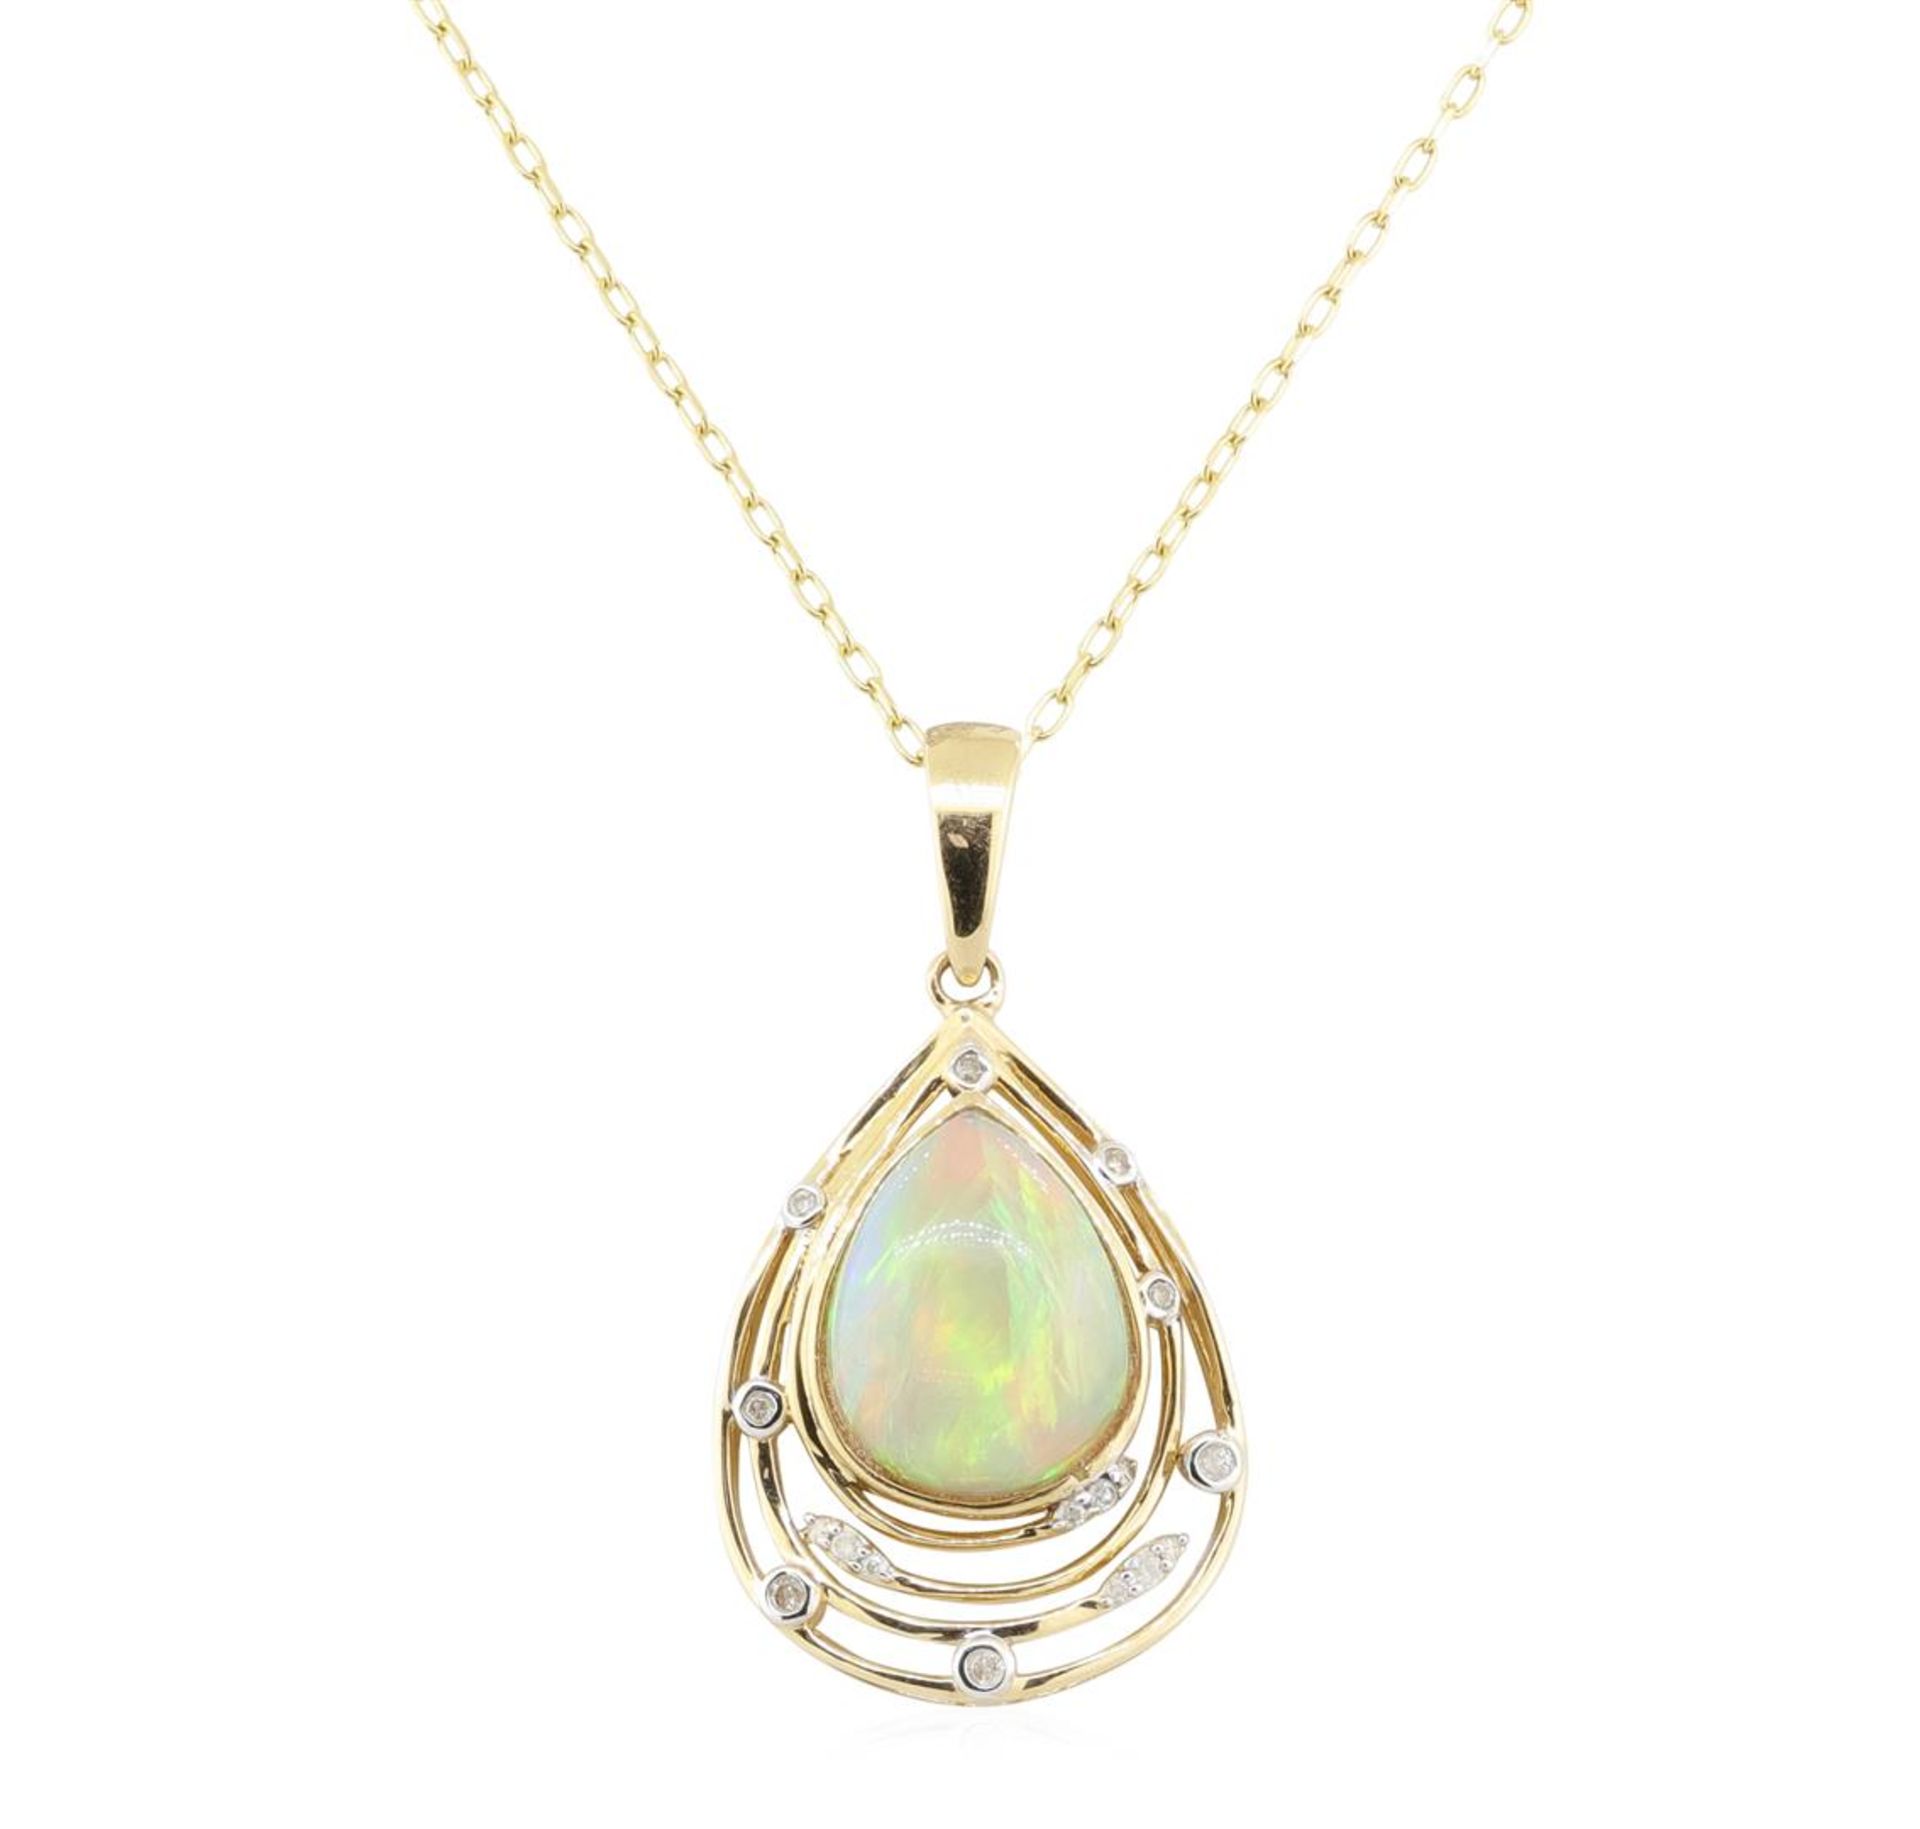 5.59 ctw Opal and Diamond Pendant - 14KT Yellow Gold - Image 2 of 2